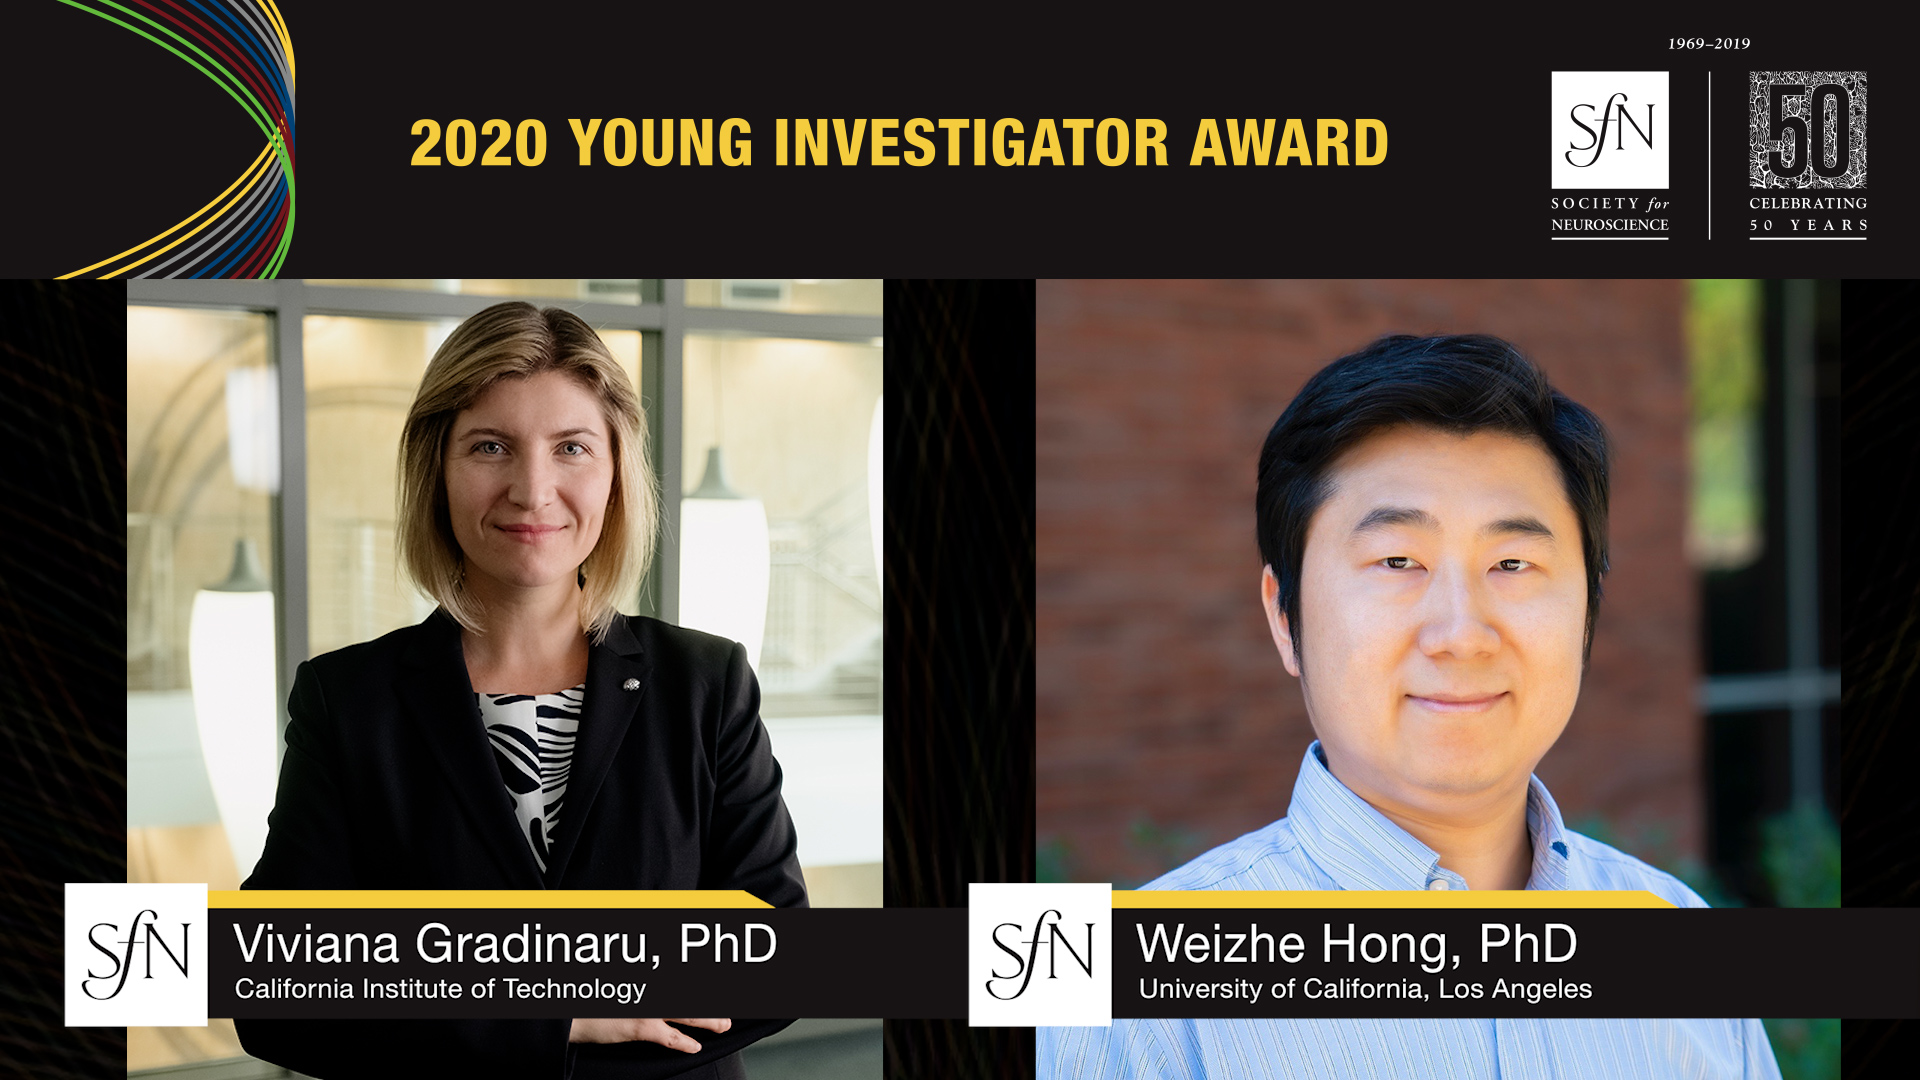 2020 Young Investigator Award winners graphic, images of Viviana Gradinaru, PhD California Institute of Technology and Weizhe Hong, PhD University of California, Los Angeles